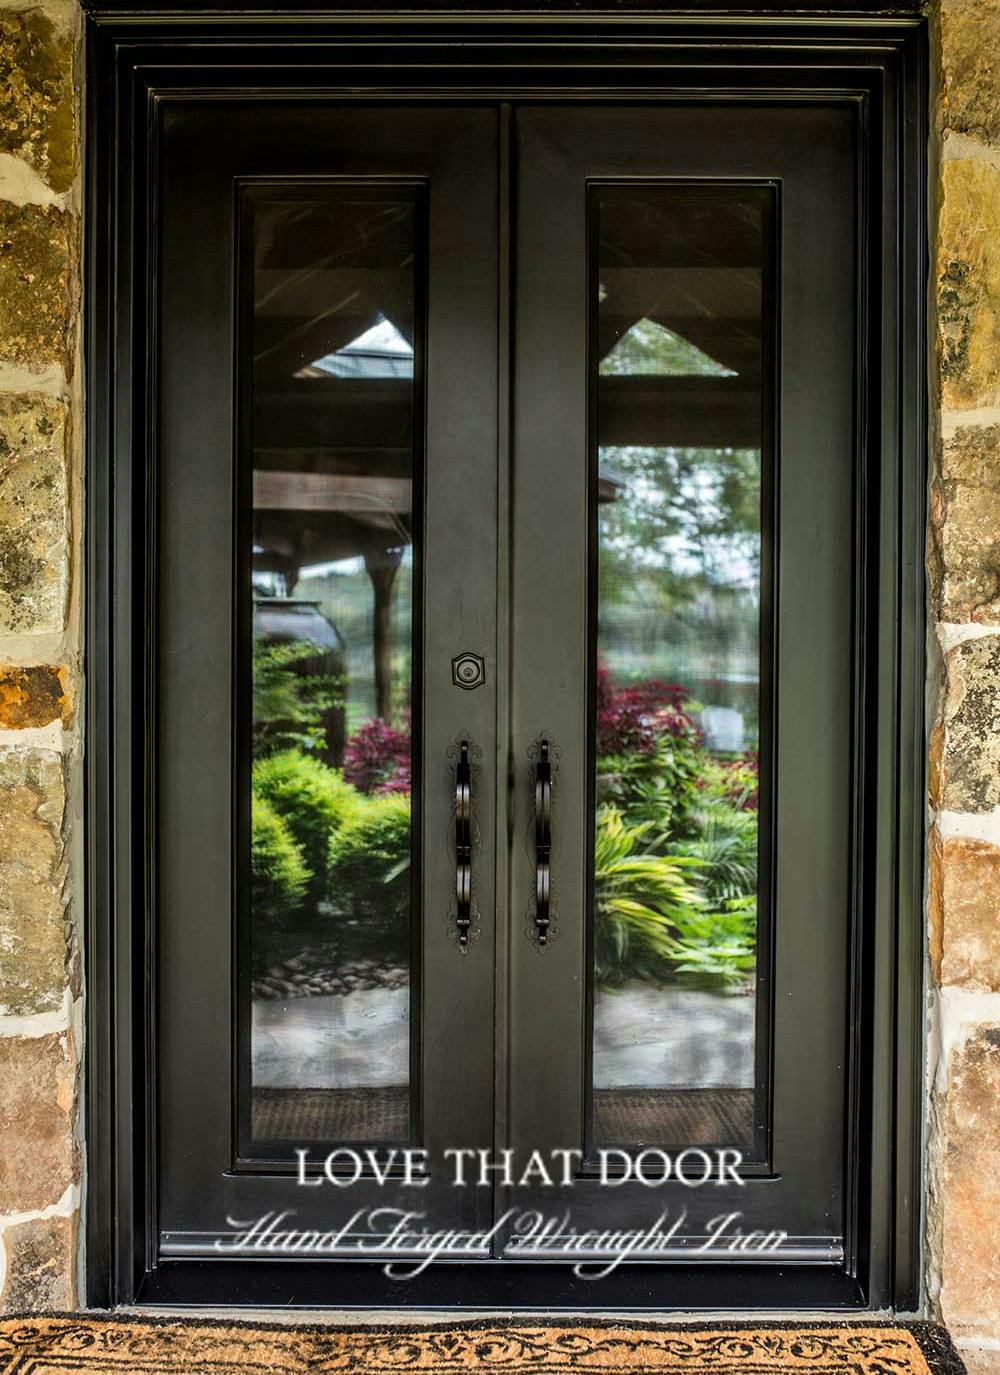 Hand-forged iron double doors with rustic charm and authentic craftsmanship